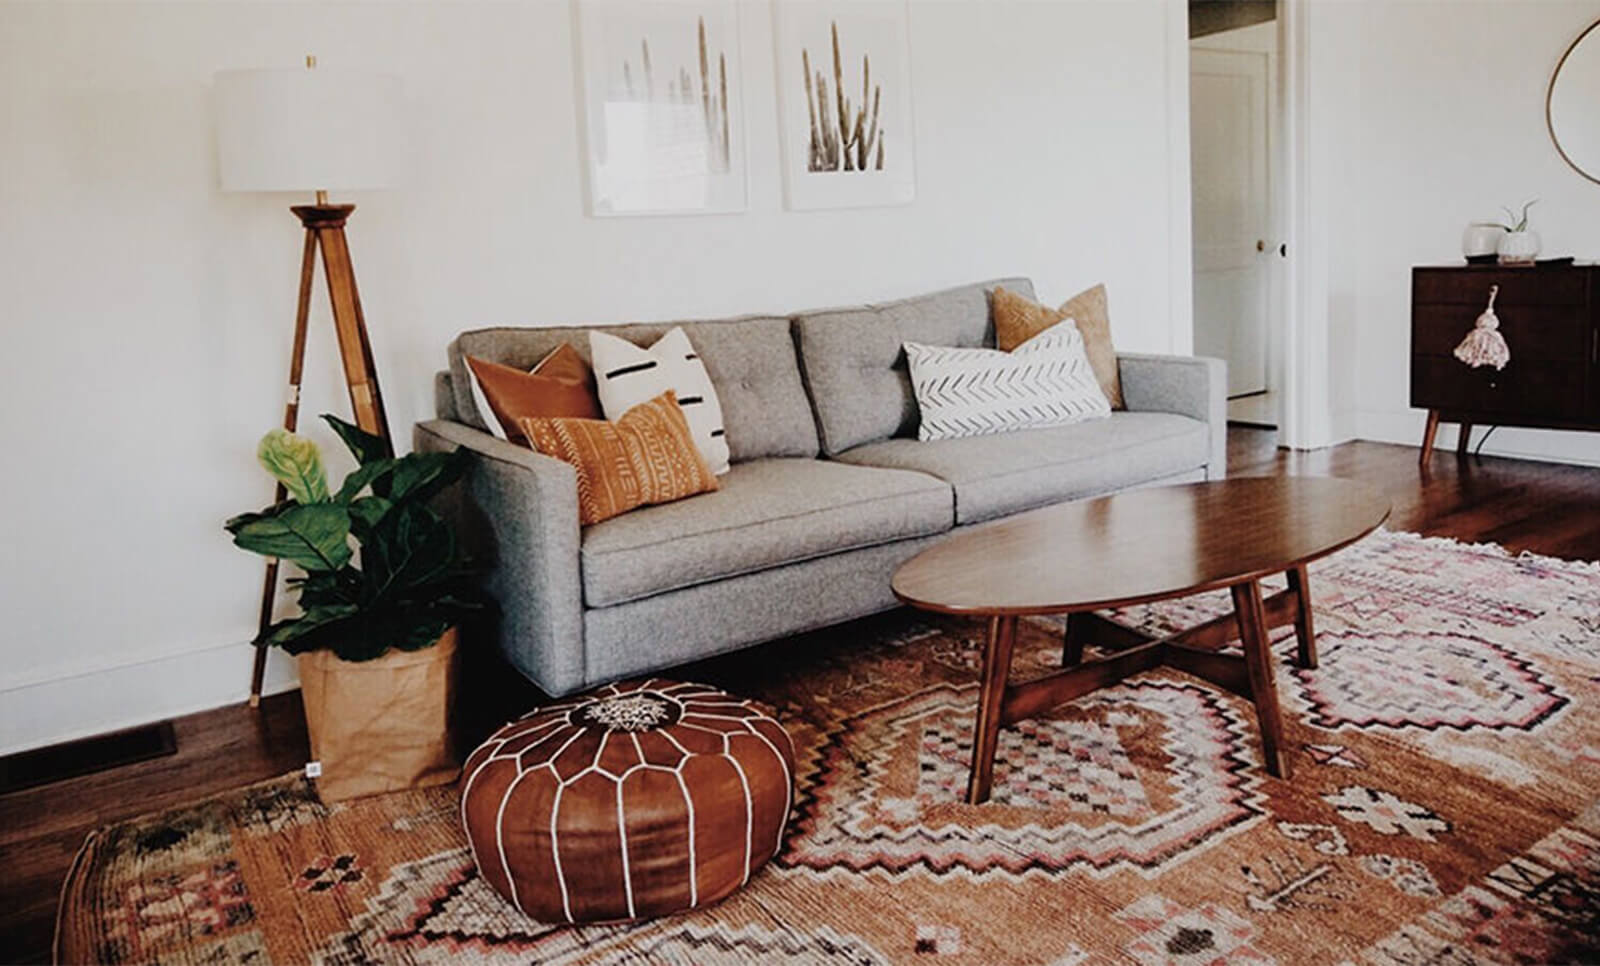 THE MOROCCAN CARPET: IDEAL GIFT FOR A HOUSEWARMING